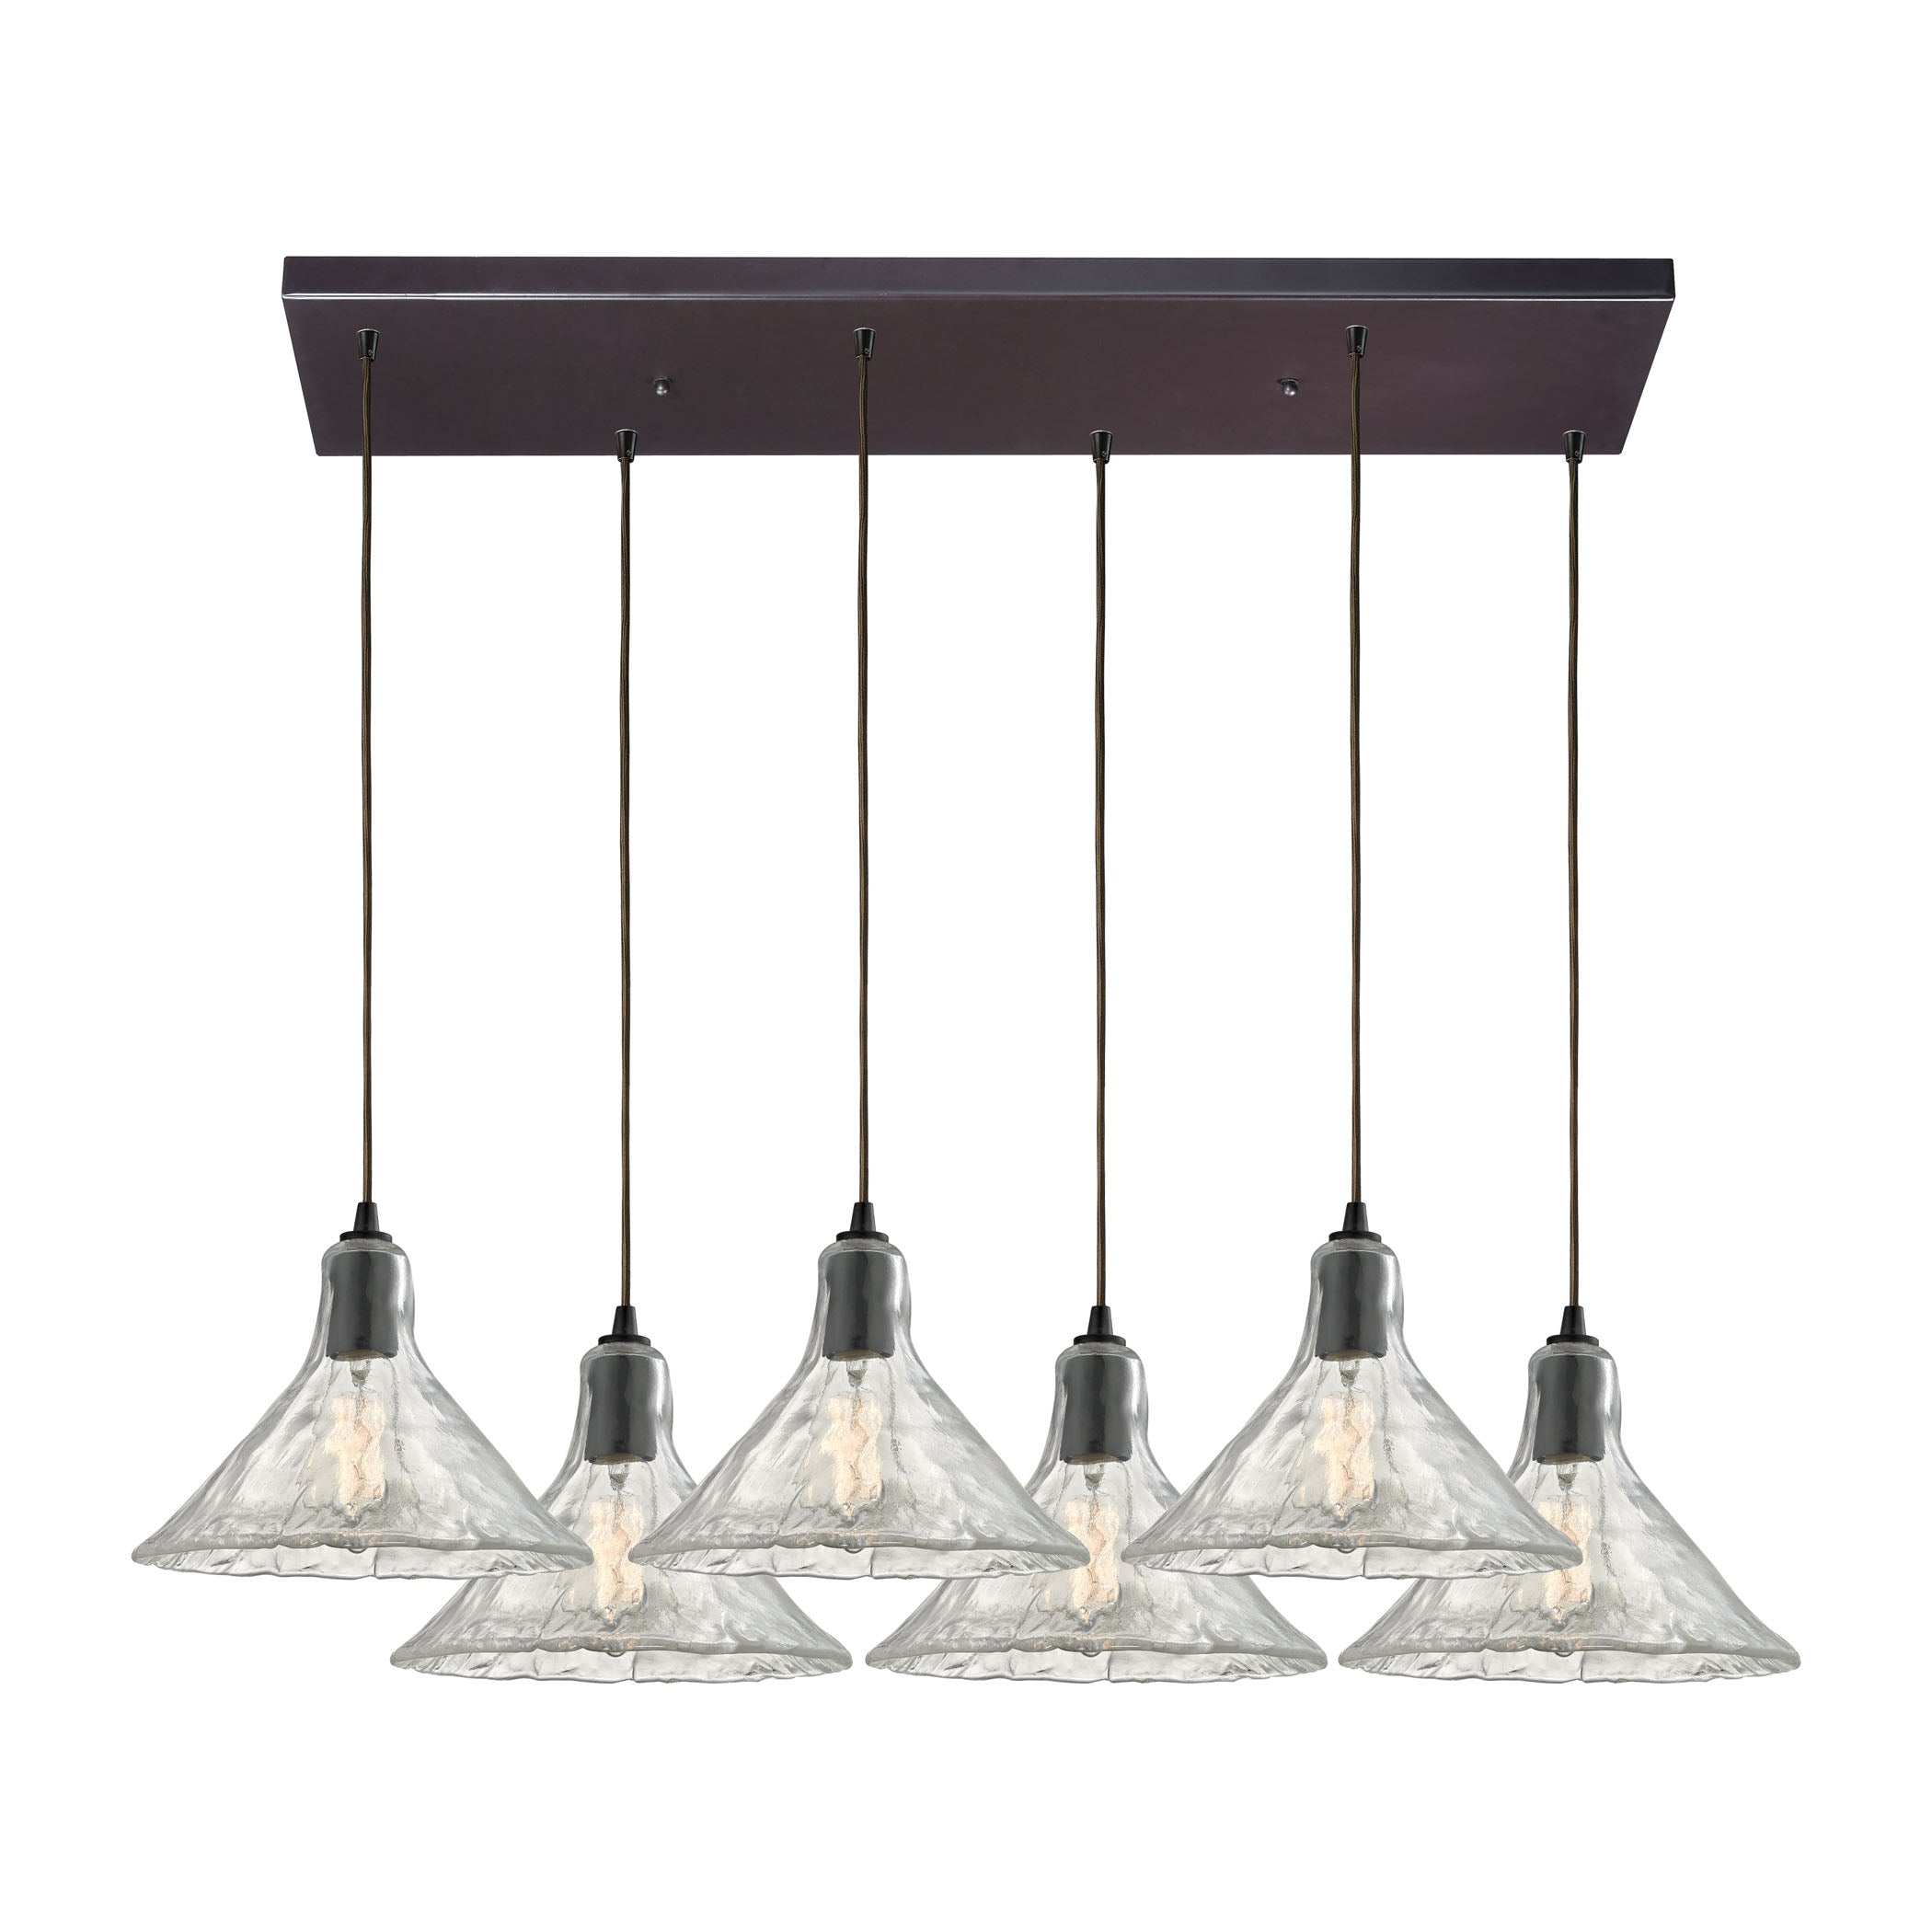 ELK Lighting 10435/6RC Hand Formed Glass 6-Light Rectangular Pendant Fixture in Oiled Bronze with Clear Hand-formed Glass